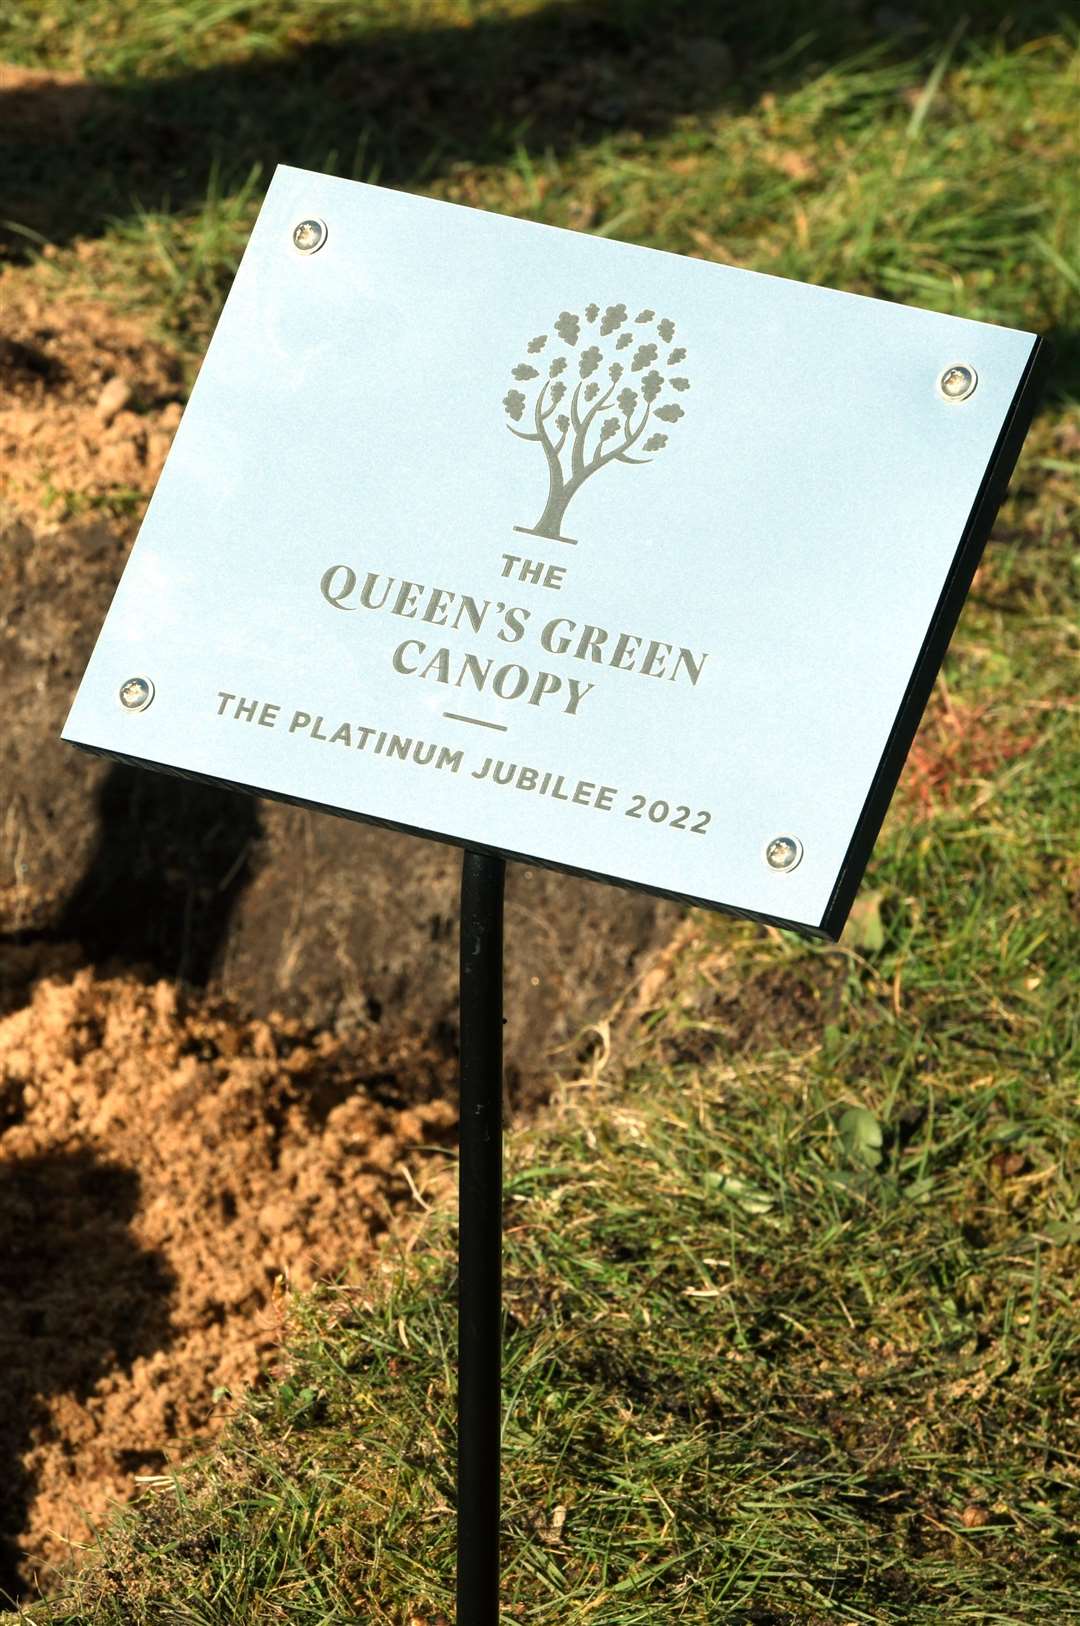 The Queen's Green Canopy plaque at the Platinum Jubilee tree planting in Nairn. Picture: James Mackenzie